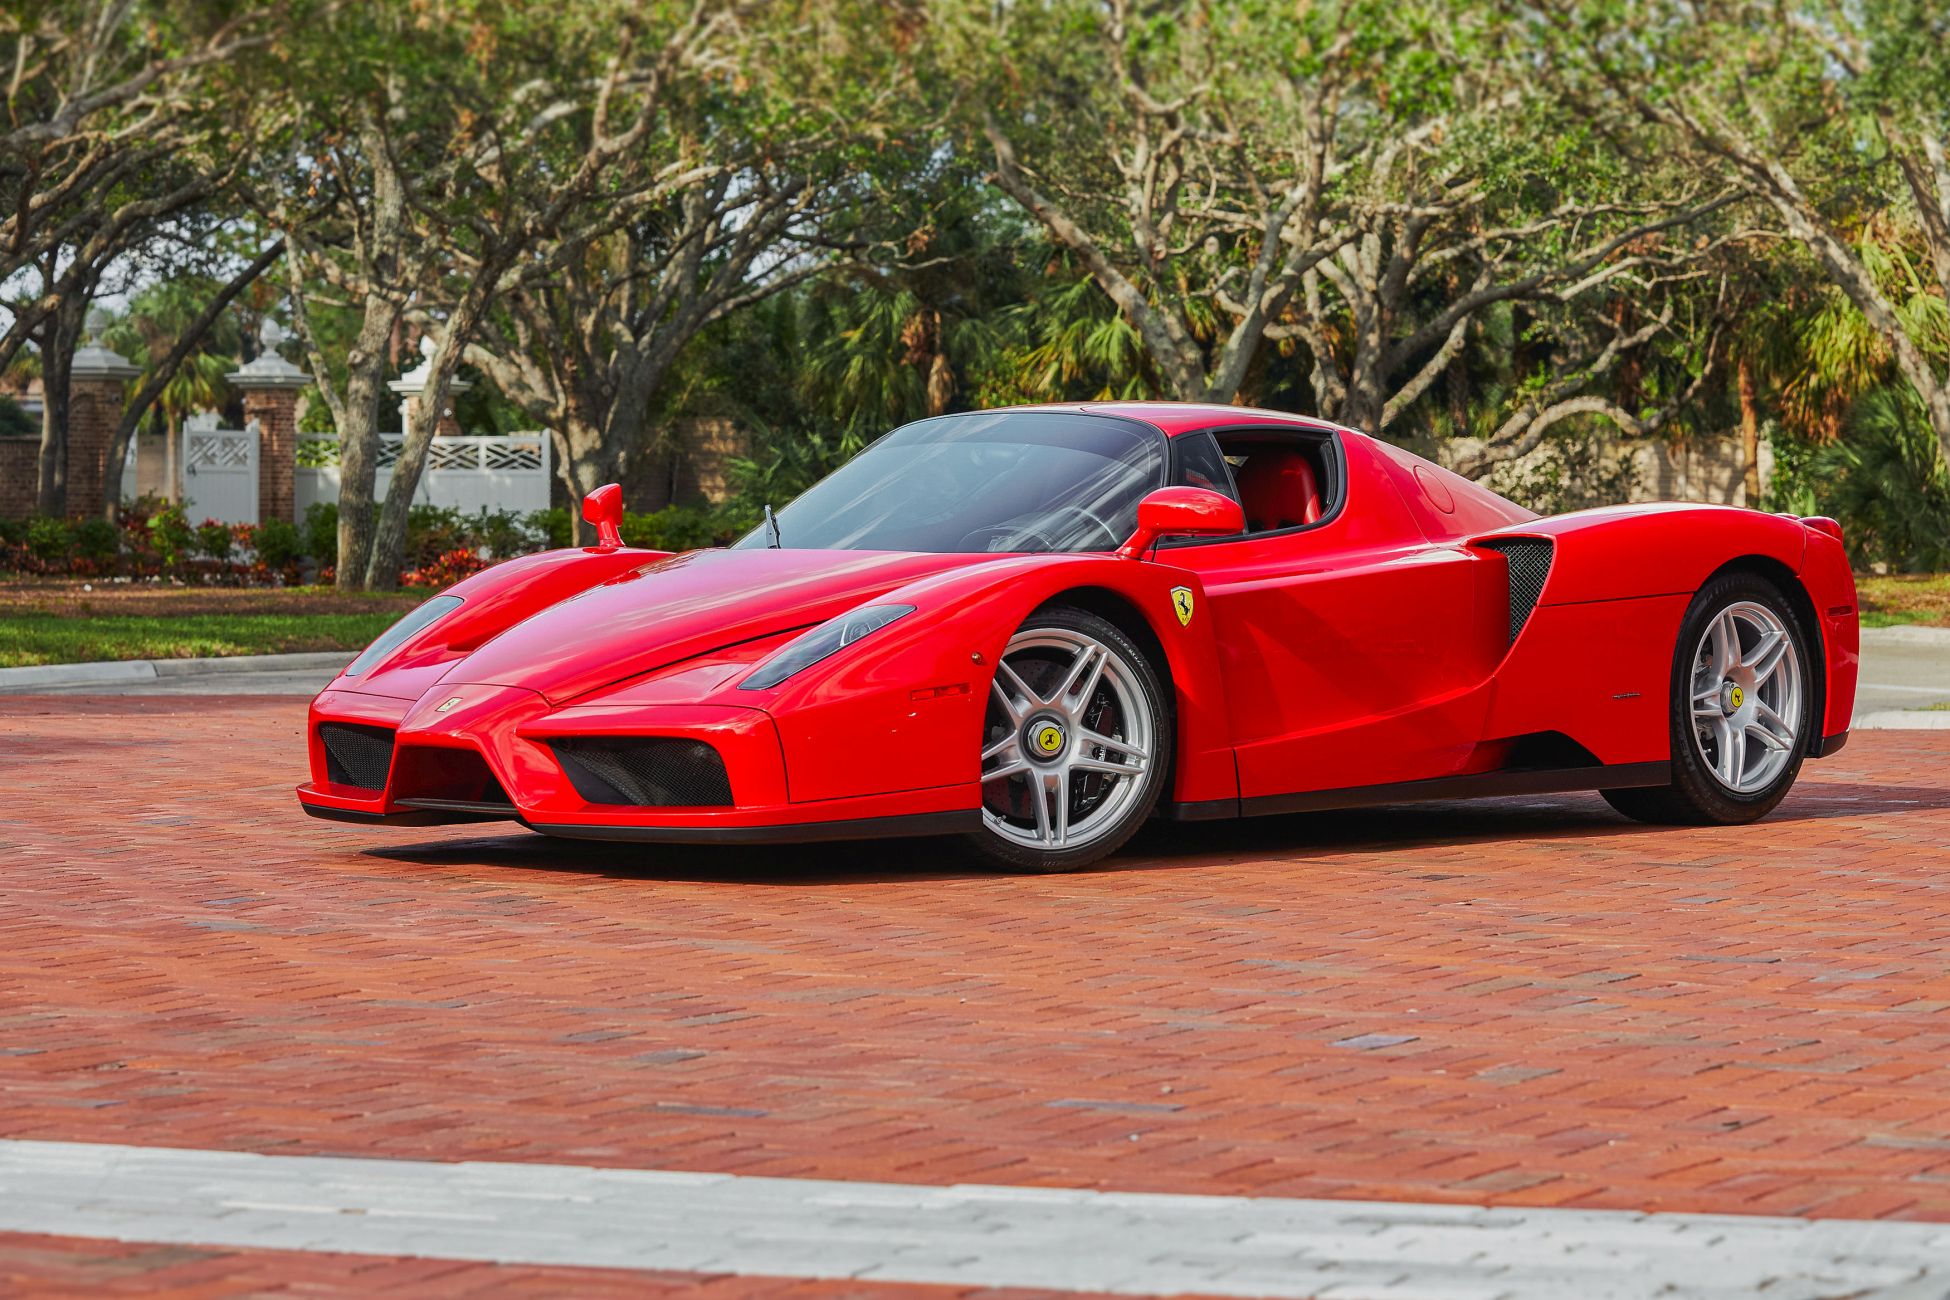 This 1-of-111 Ferrari Enzo Destined for the American Market Is for Sale - autoevolution